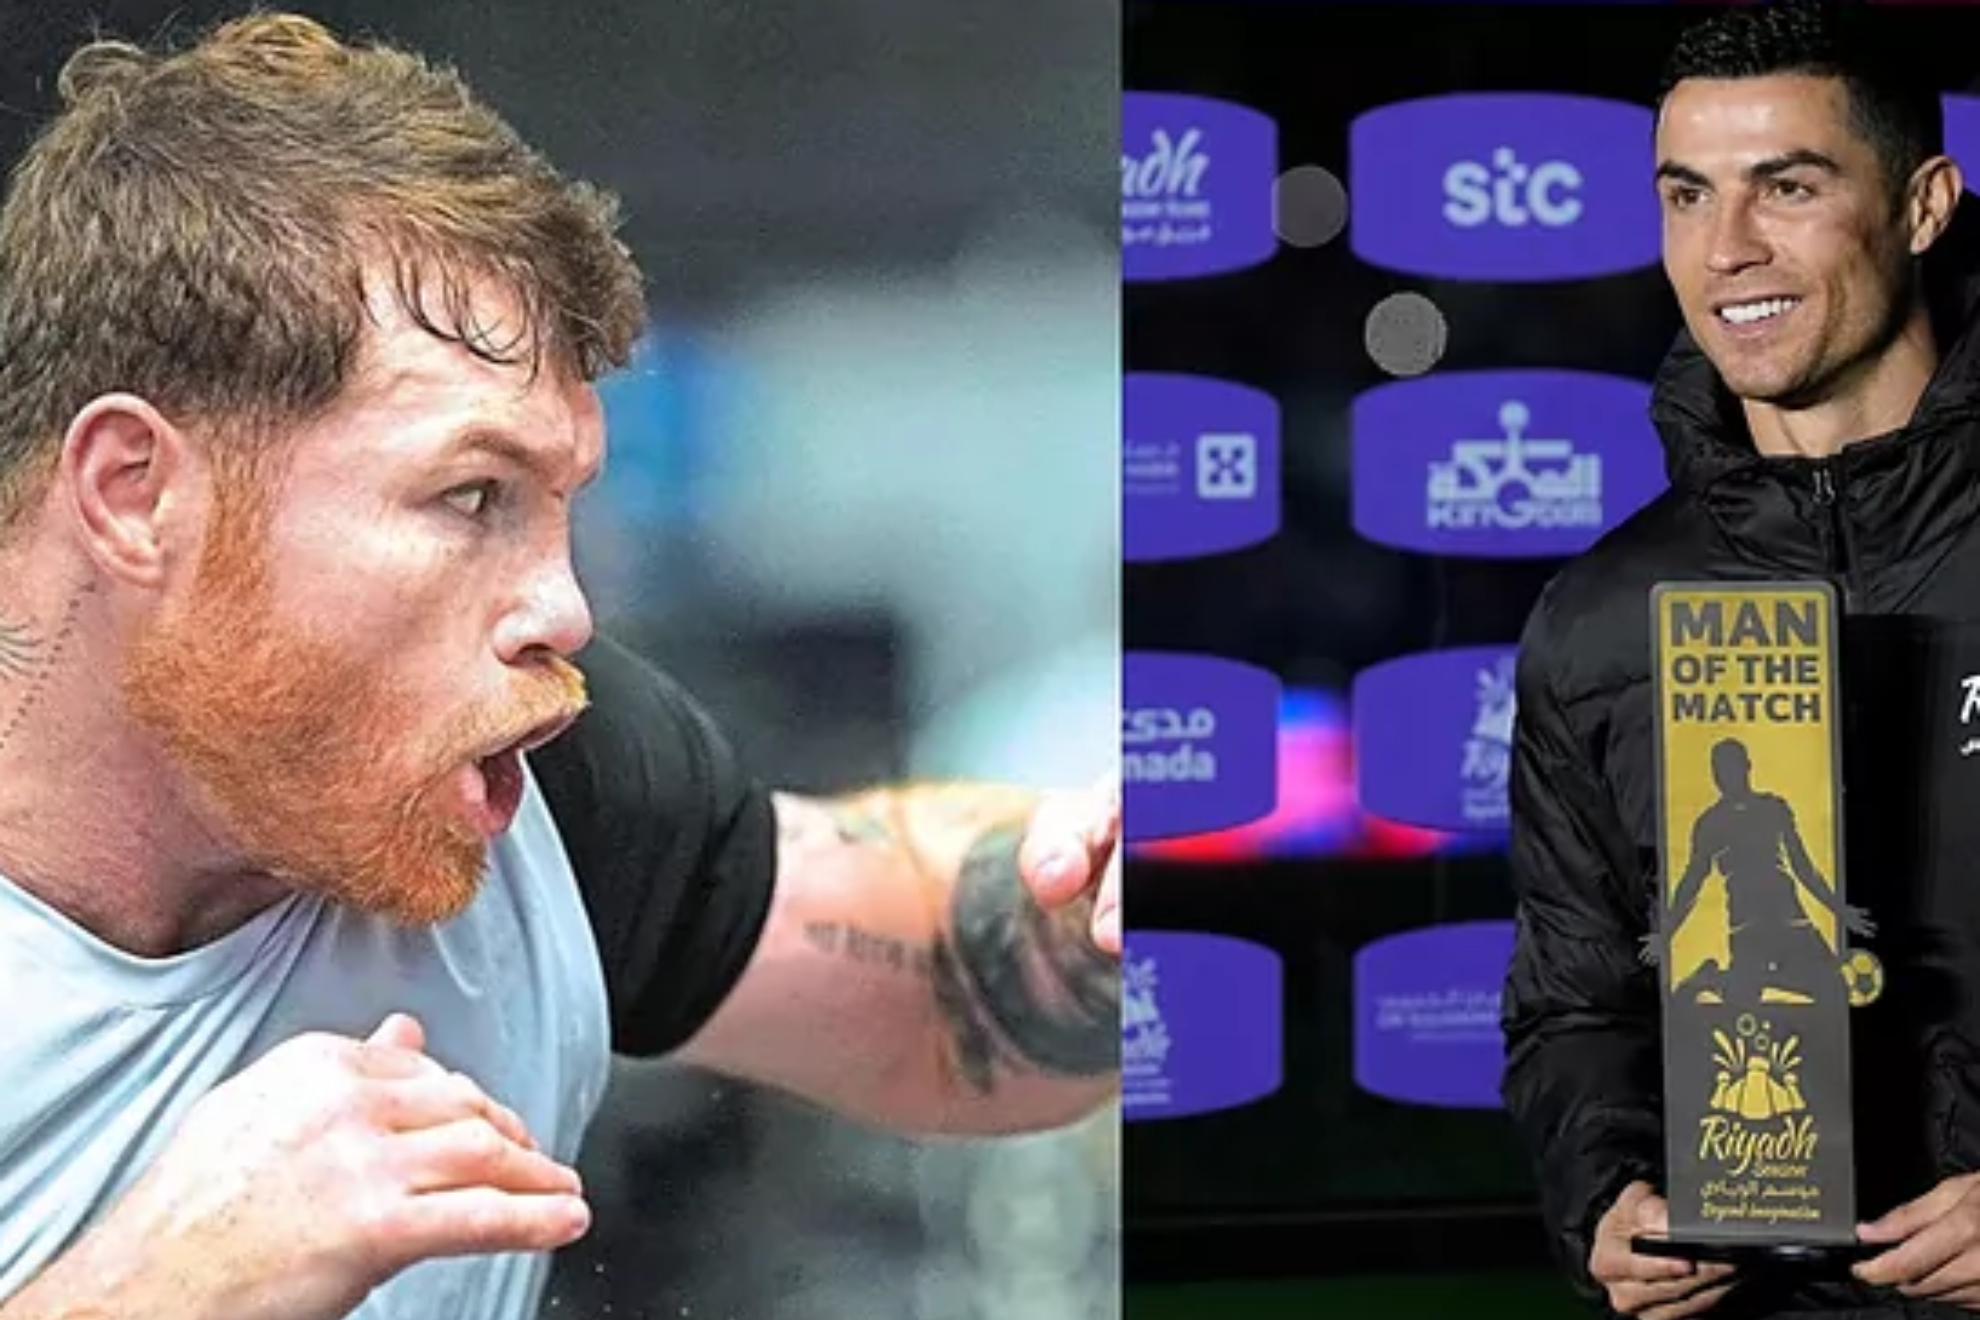 Canelo Alvarez and Cristiano Ronaldo are two of the athletes who generated the highest earnings in 2022.